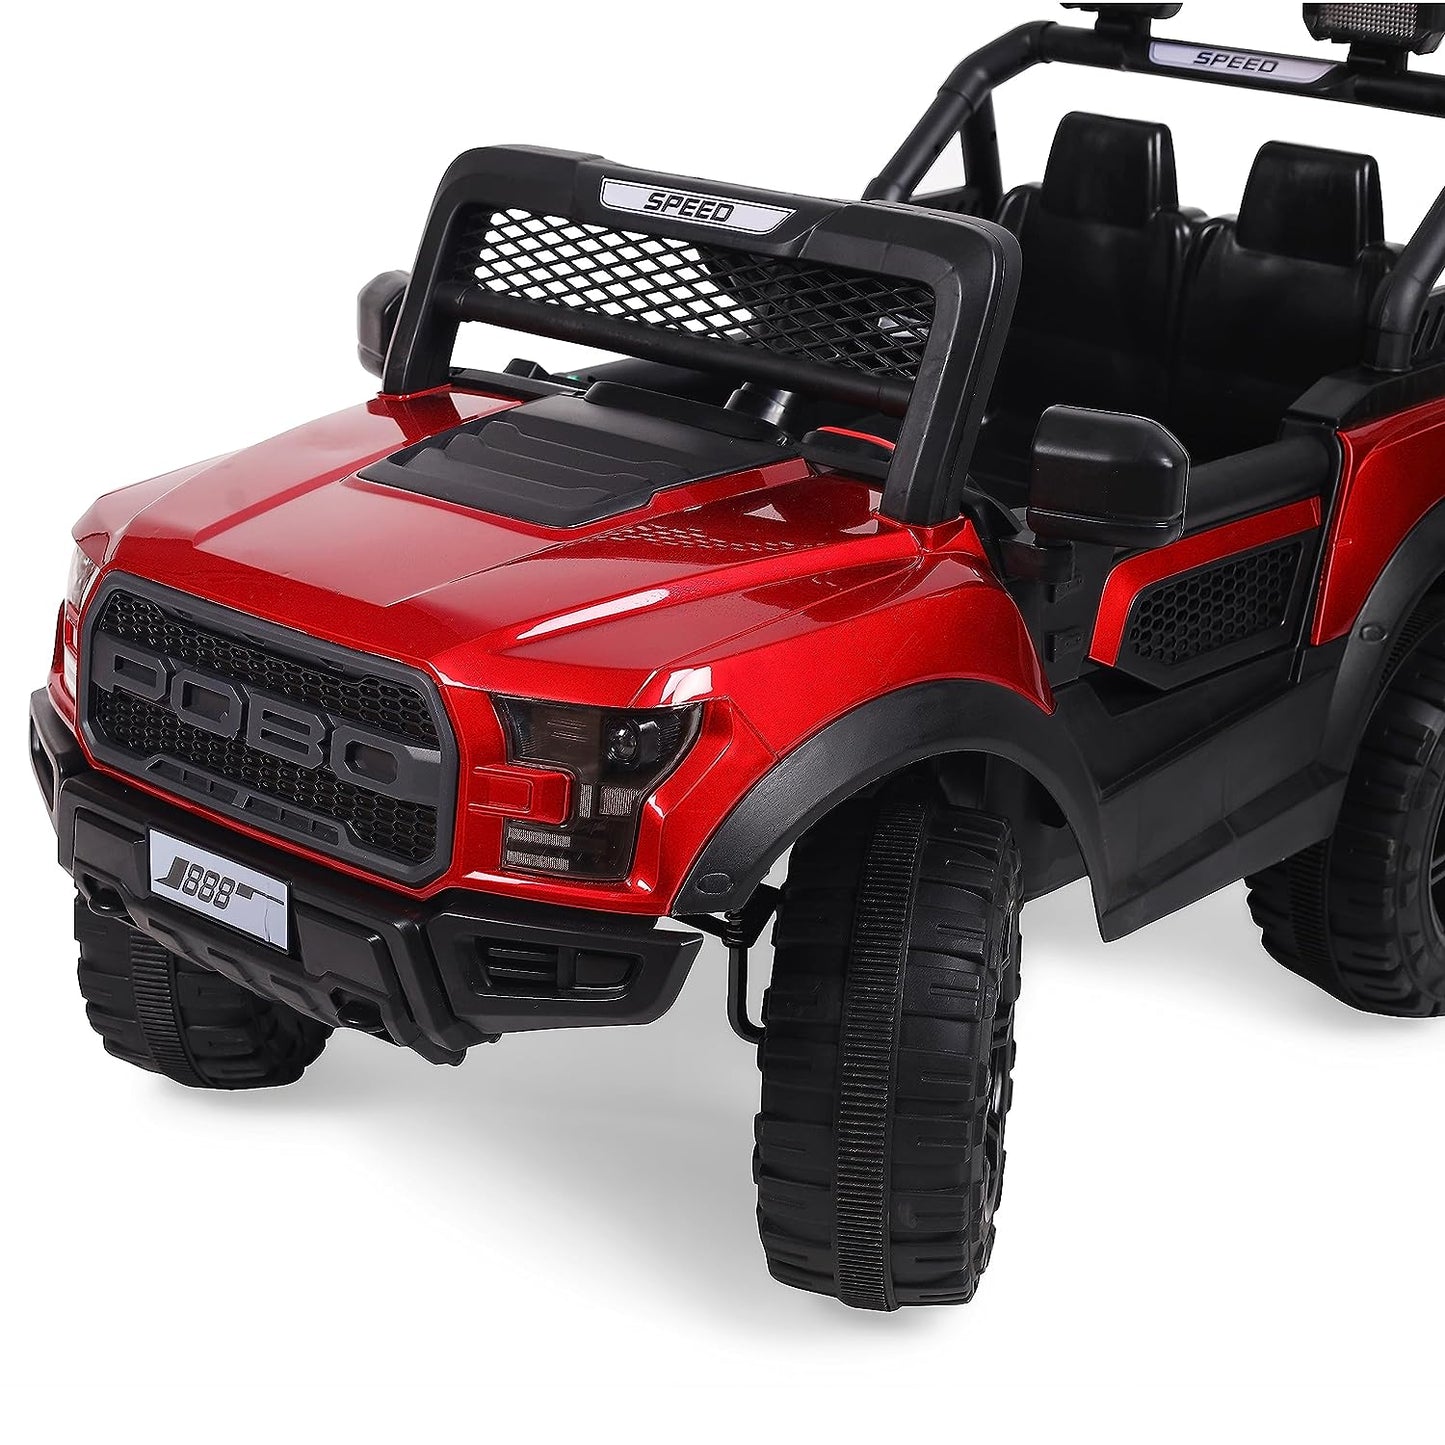 GettBoles Electric Battery Operated Ride on Jeep for Kids of Age 2 to 6 Years- The Metallic Painted Driving Ride on Car with Music, Lights and Bluetooth Remote Control (Red)